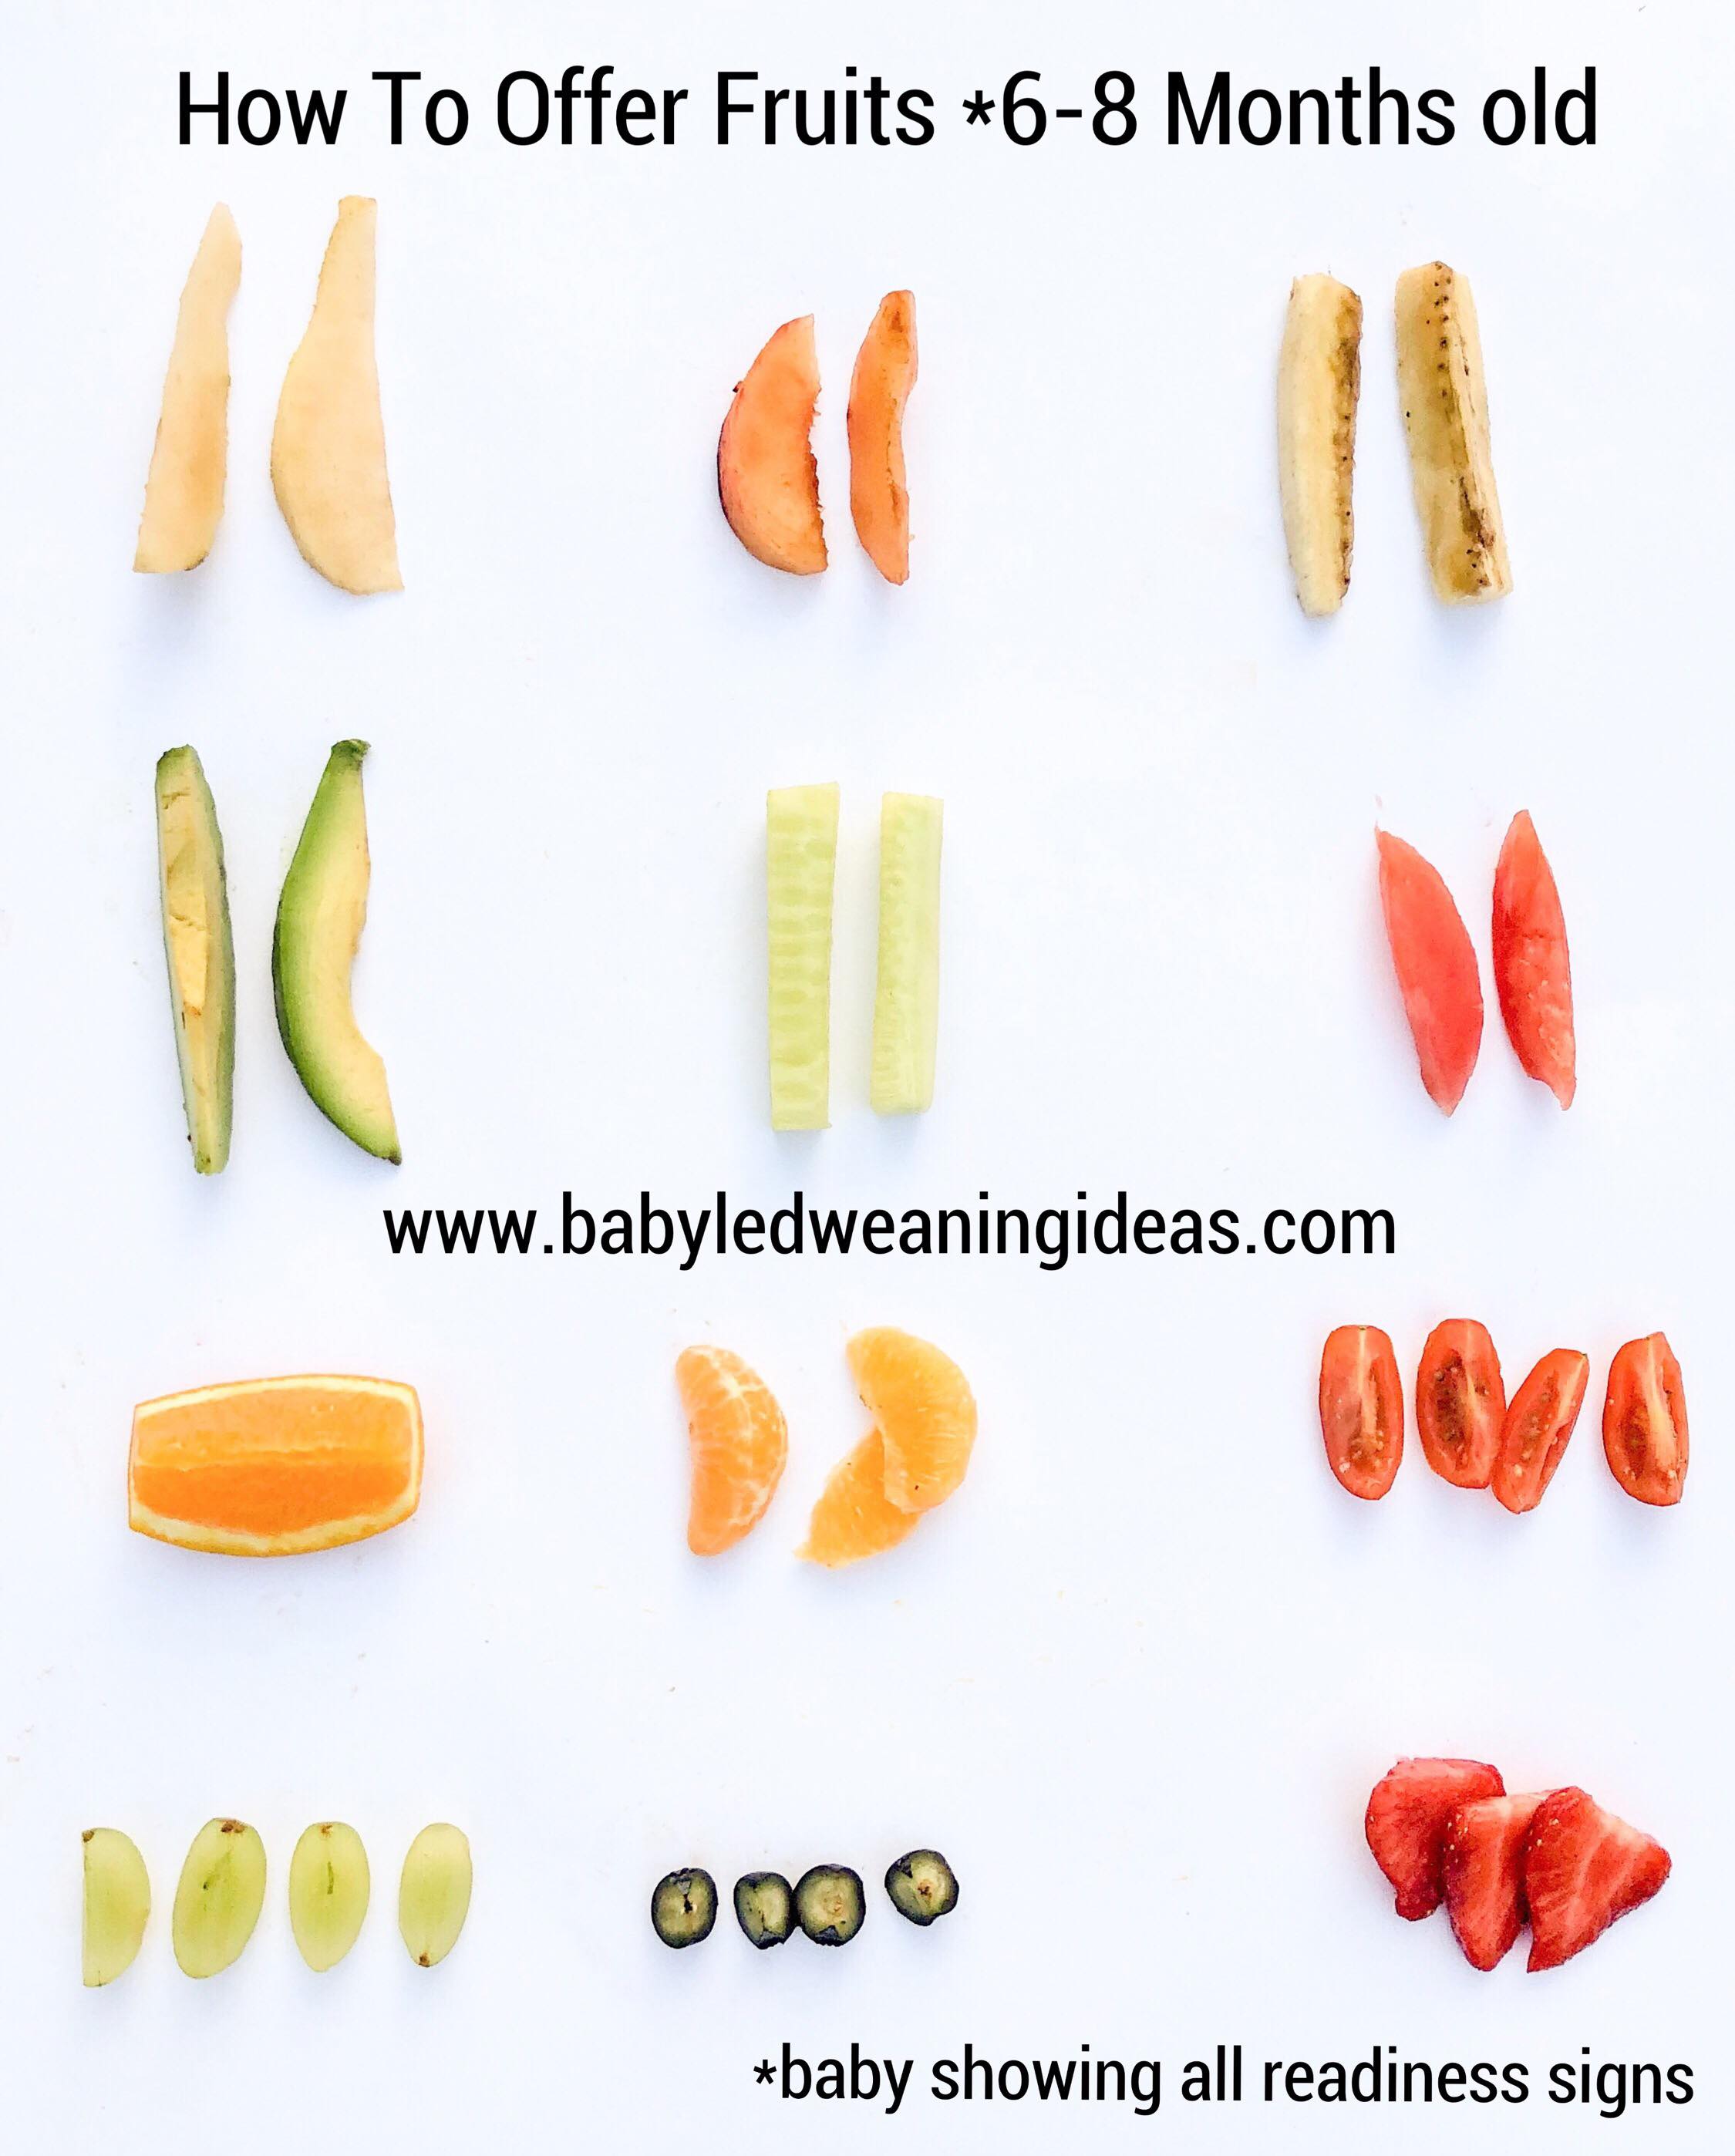 melon baby led weaning